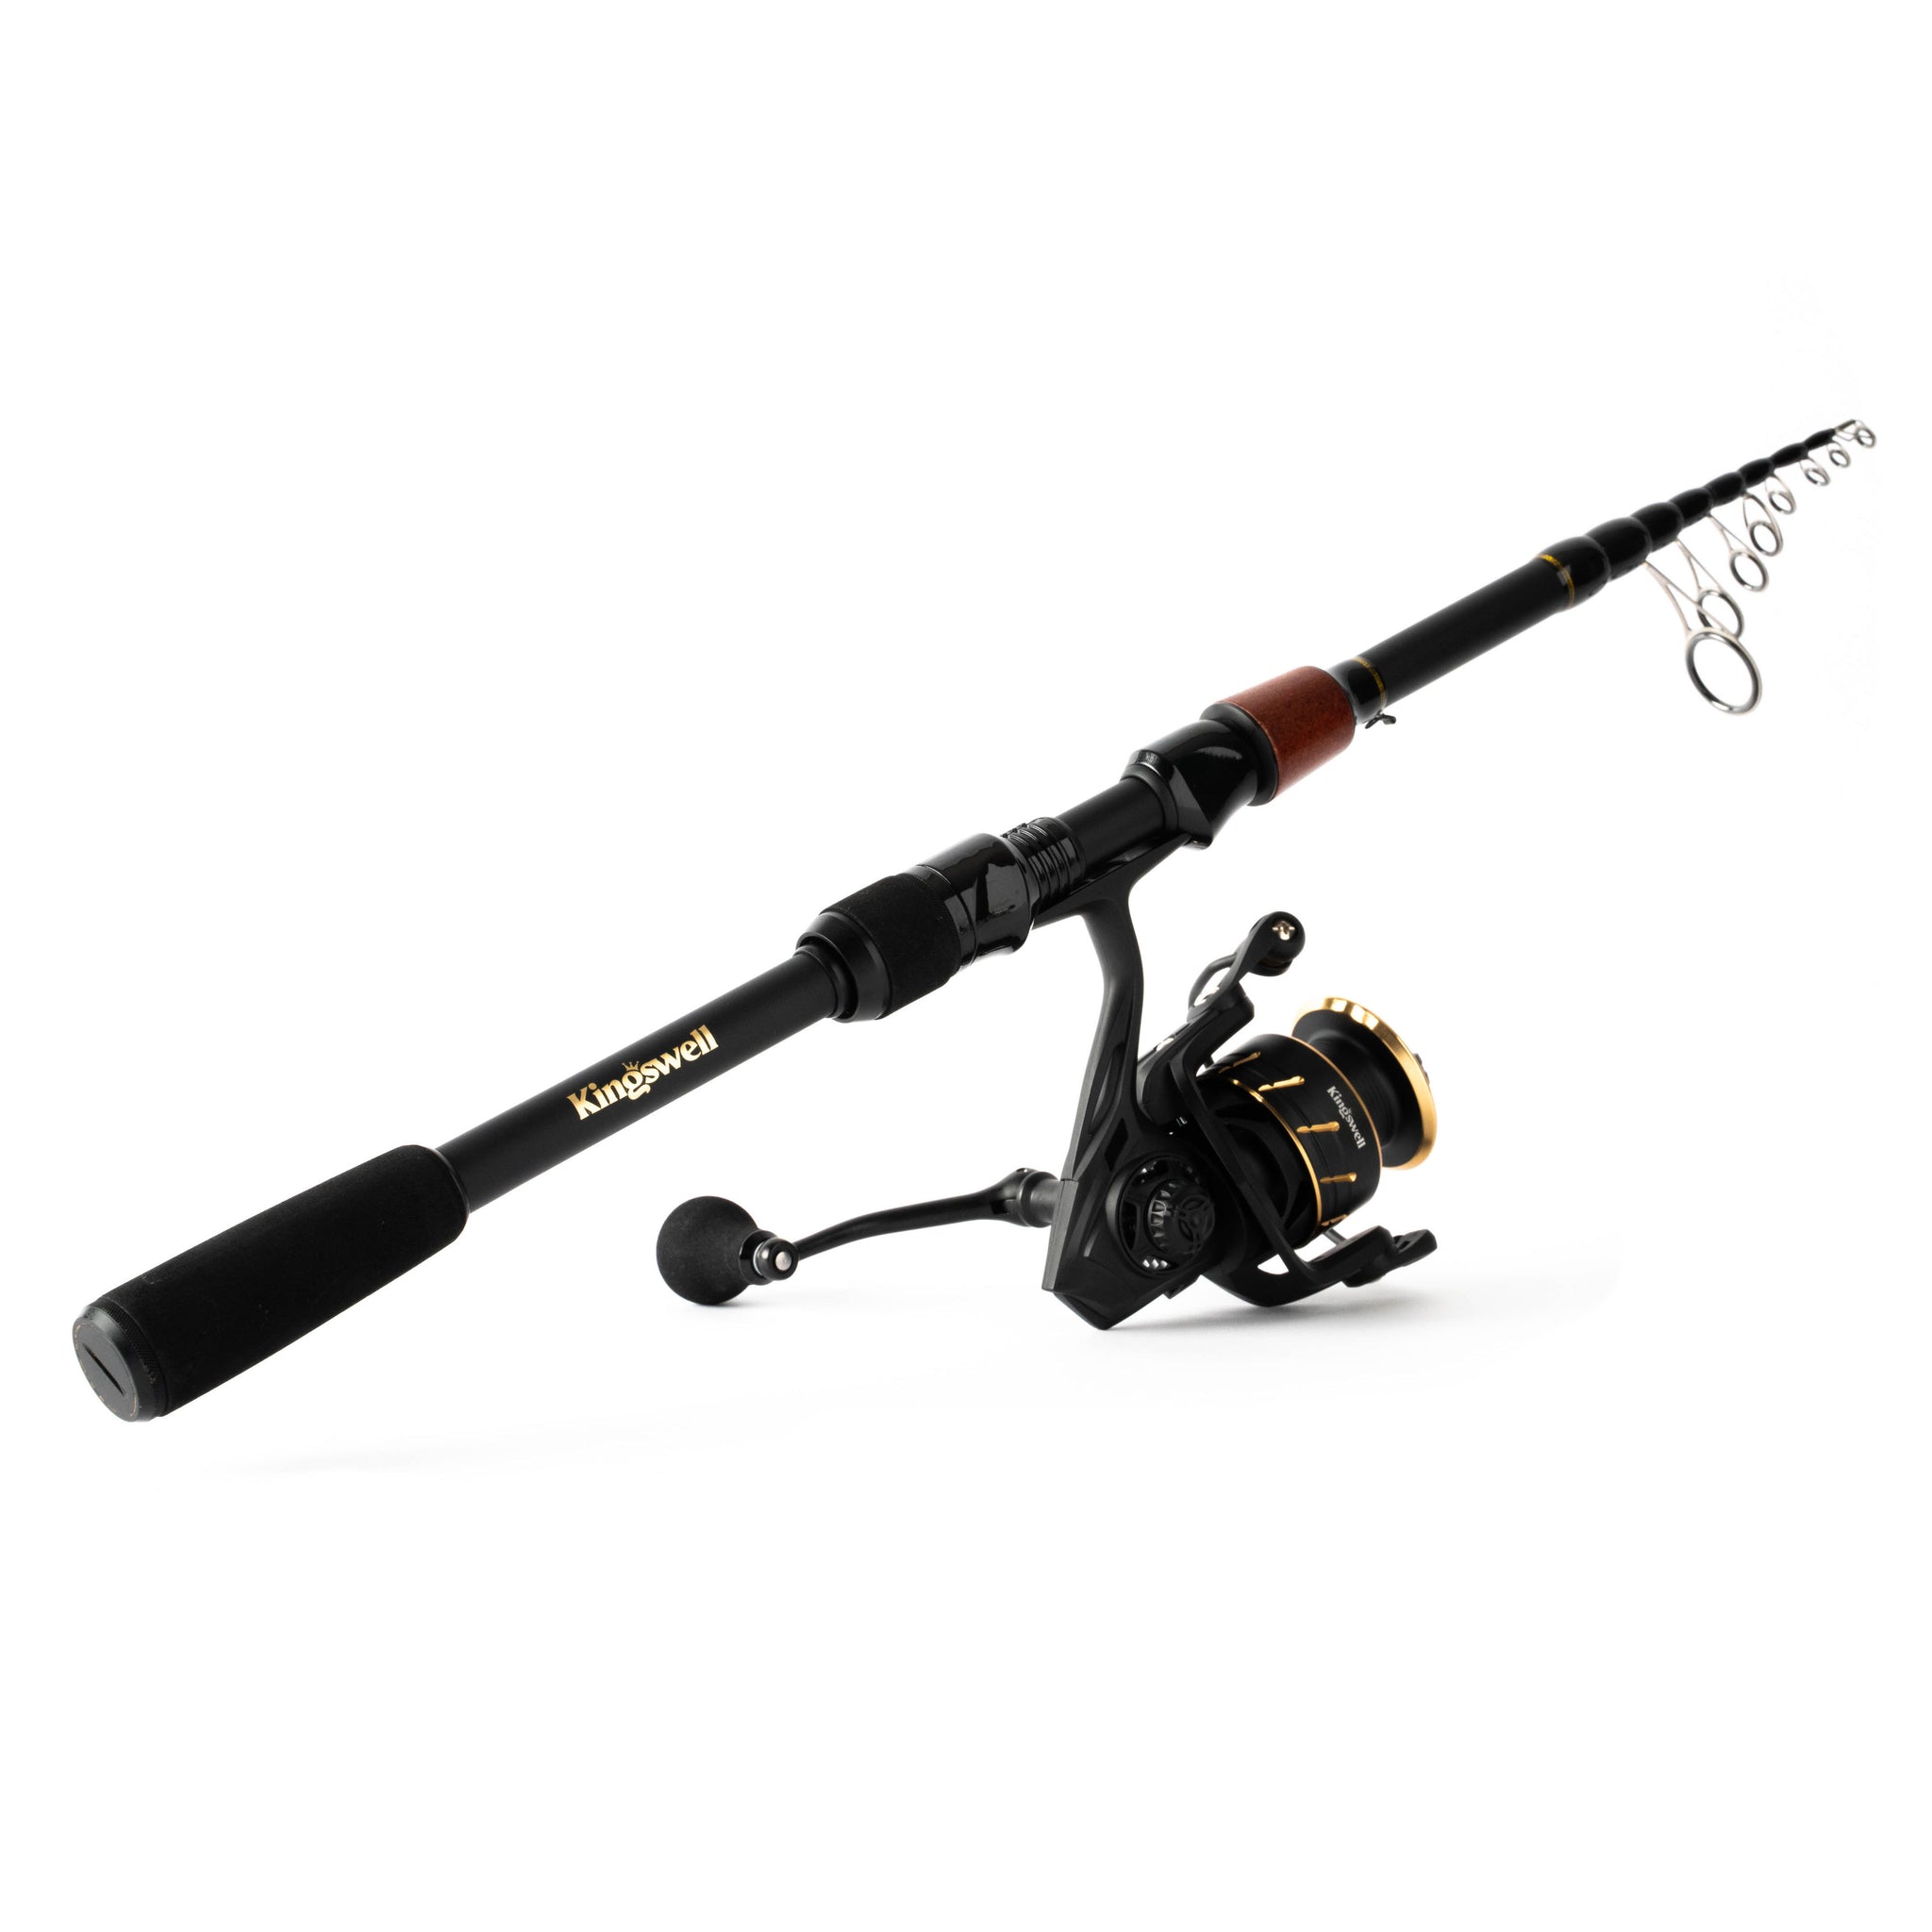 Fishing Poles Fishing Rod Carbon Fiber Telescopic Fishing Pole with  Spinning Reel for Travel Saltwater Freshwater Fishing Rod and Reel Combos